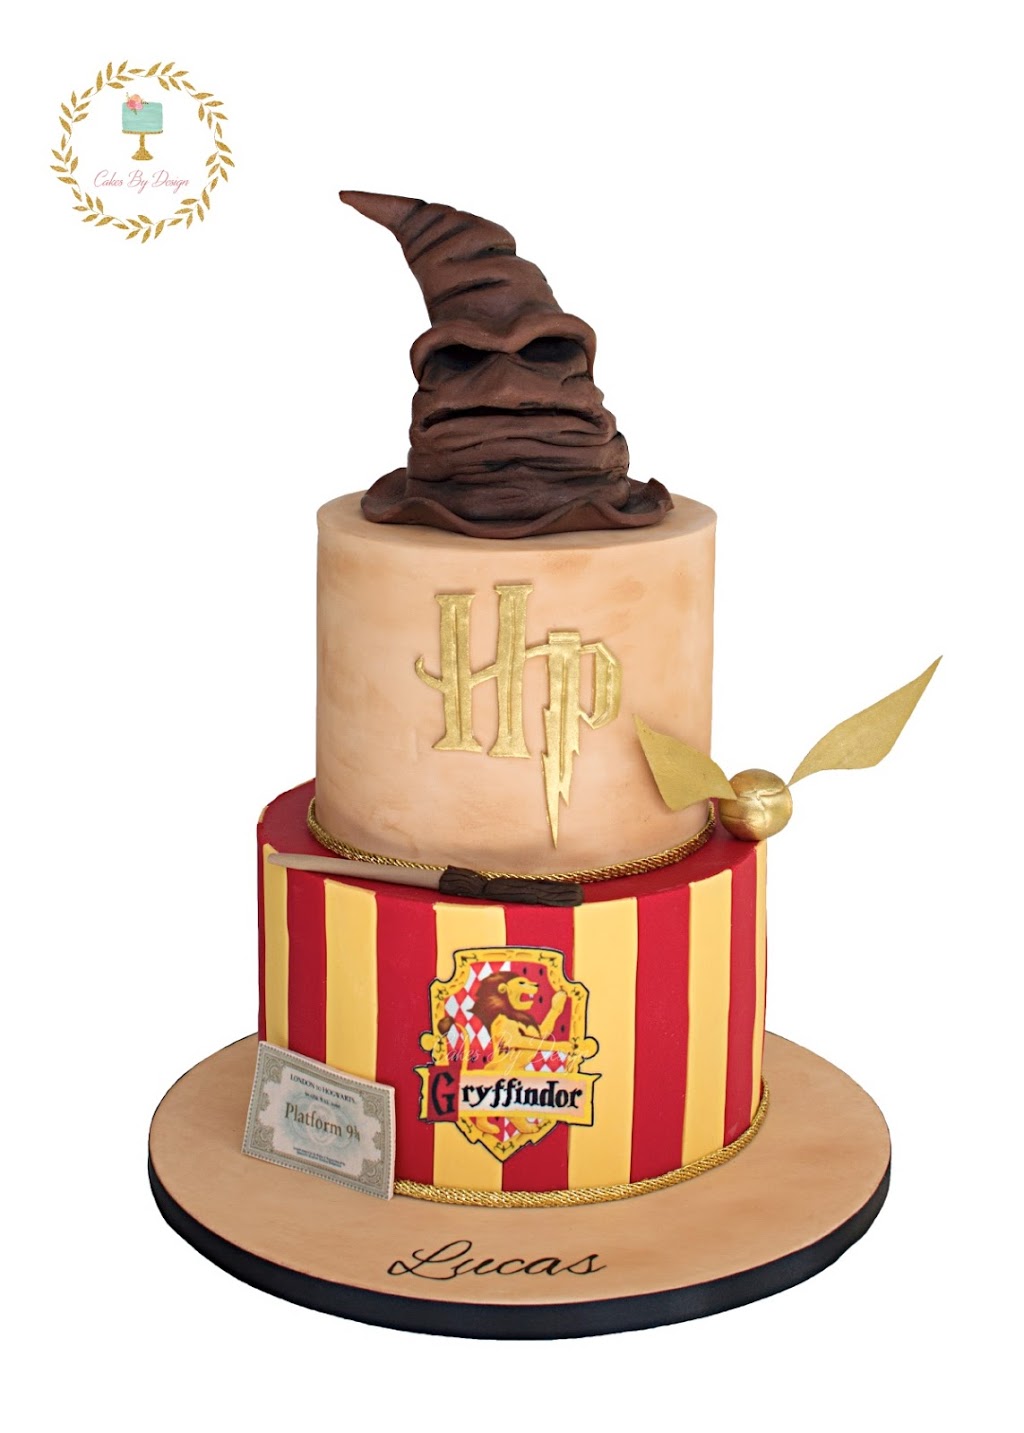 Cakes by Design | bakery | By Appointment Only, Ipswich QLD 4304, Australia | 0430500947 OR +61 430 500 947